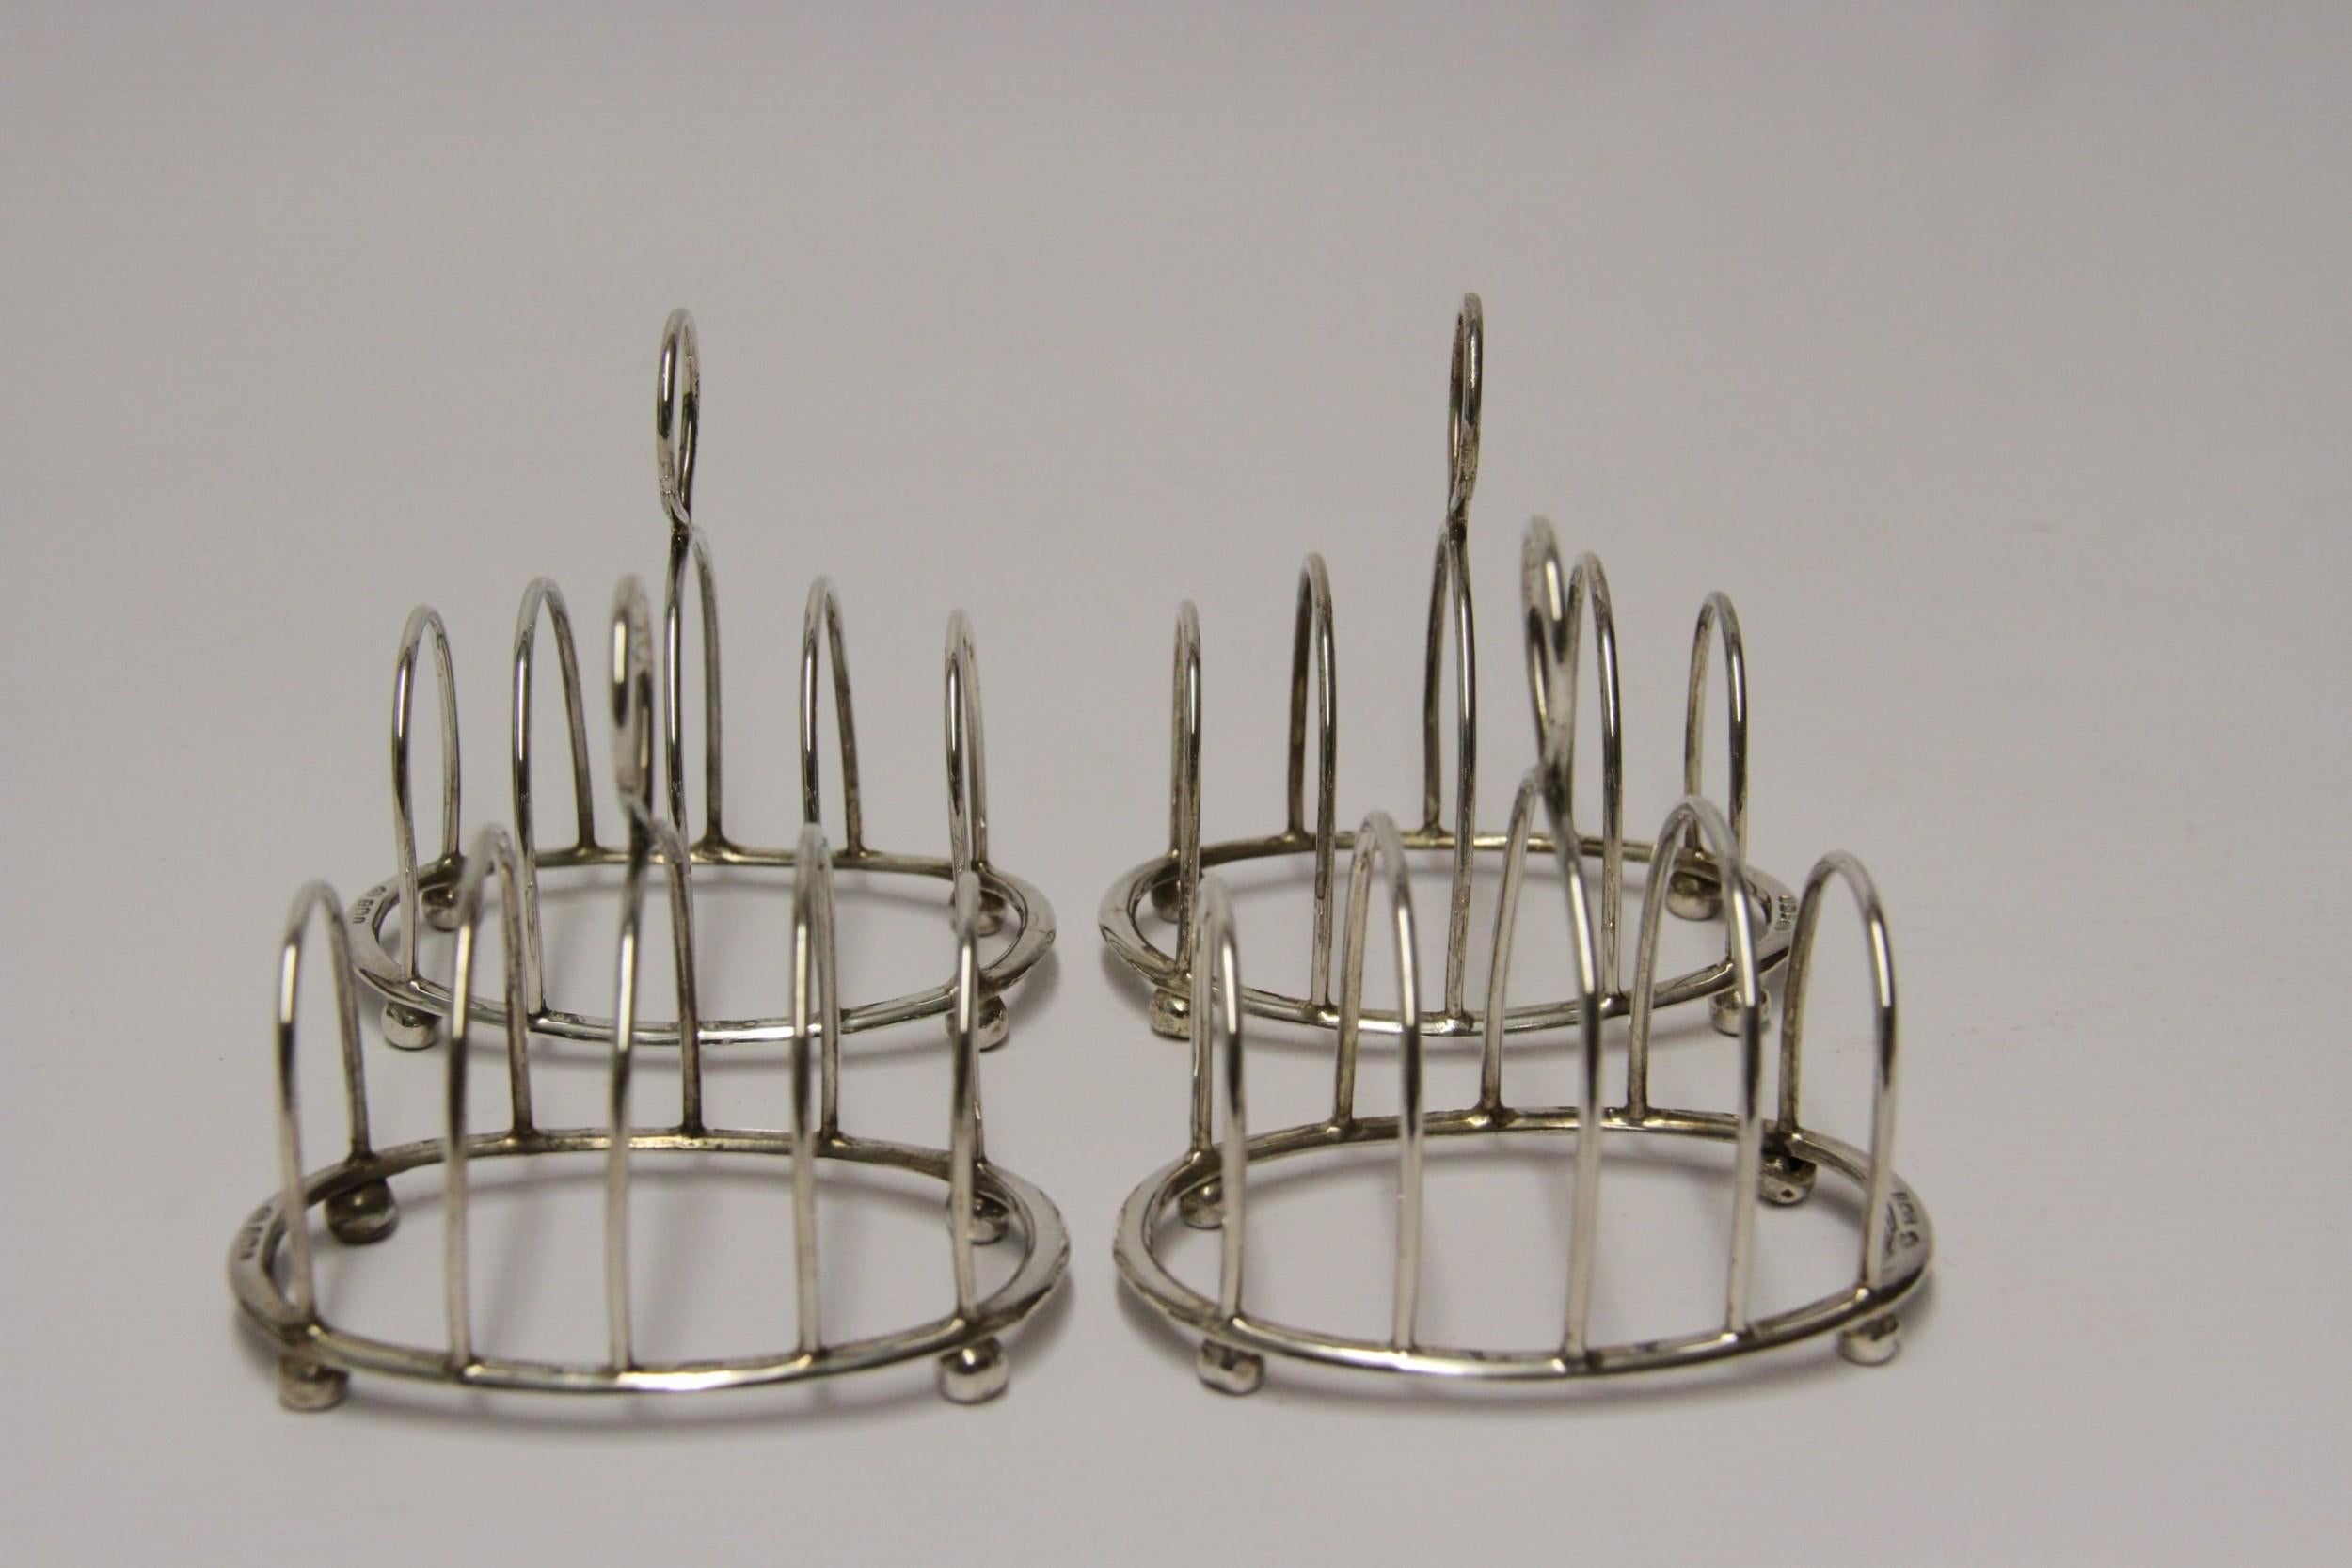 A delightful set of four solid silver toast racks made to a simple oval design with ball feet and loop handles for lifting. These very usable toast racks were made for single place settings as they are quite small. They are in good condition with no